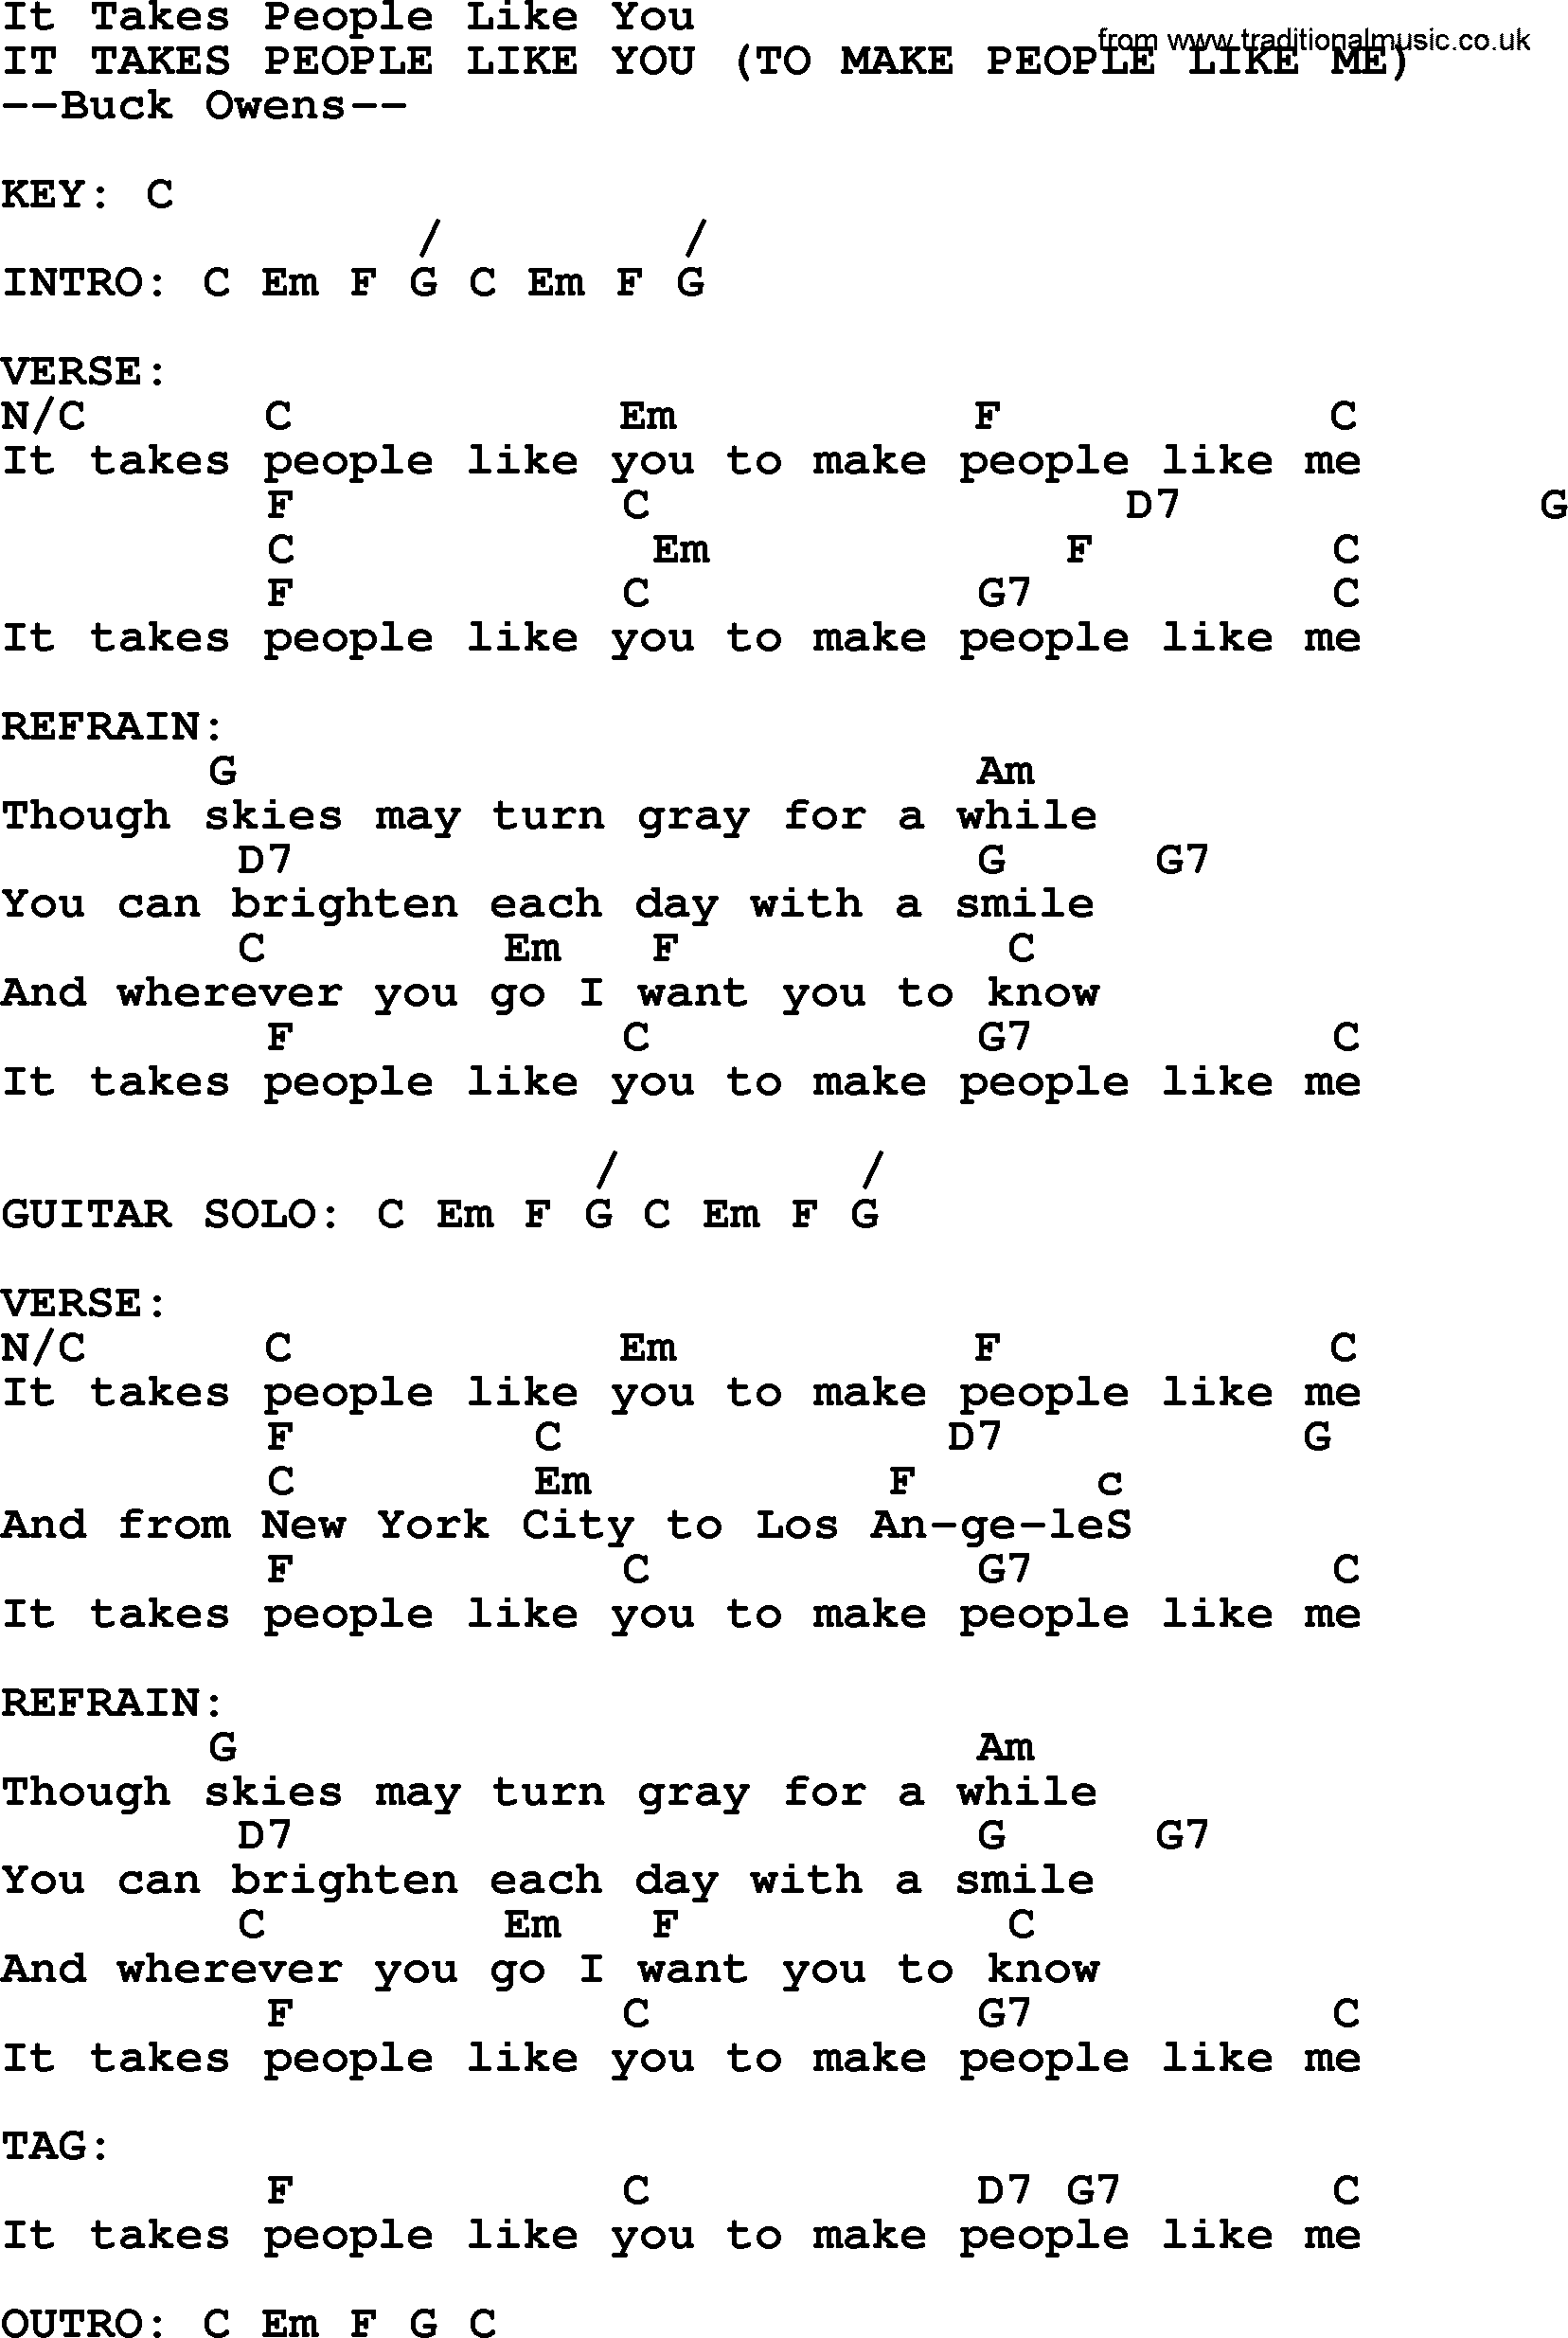 Bluegrass song: It Takes People Like You, lyrics and chords